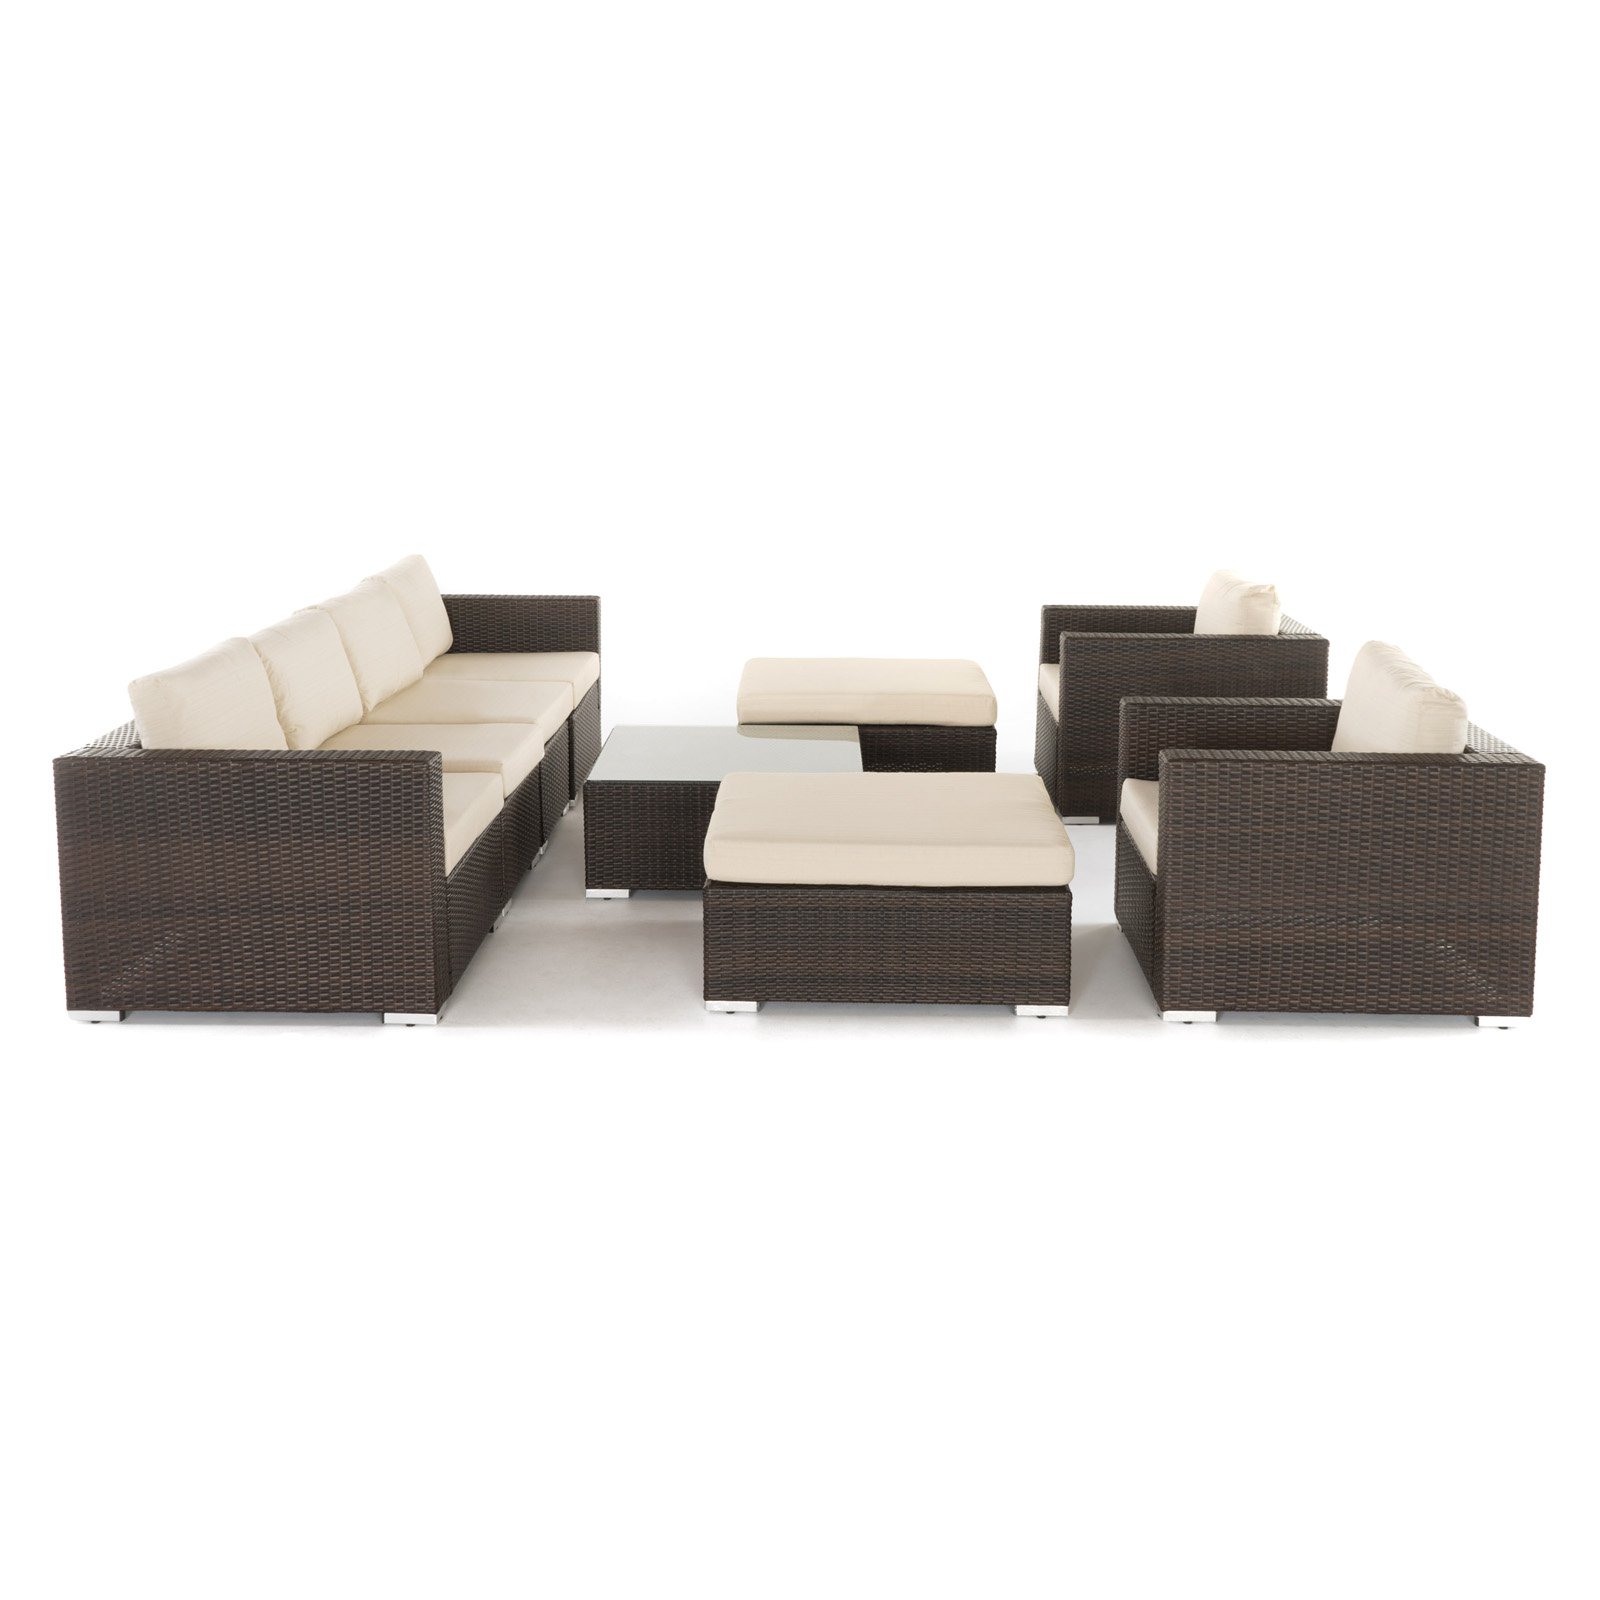 Francisco 9pc Outdoor Wicker Sectional Sofa Set with Cushions - image 4 of 9